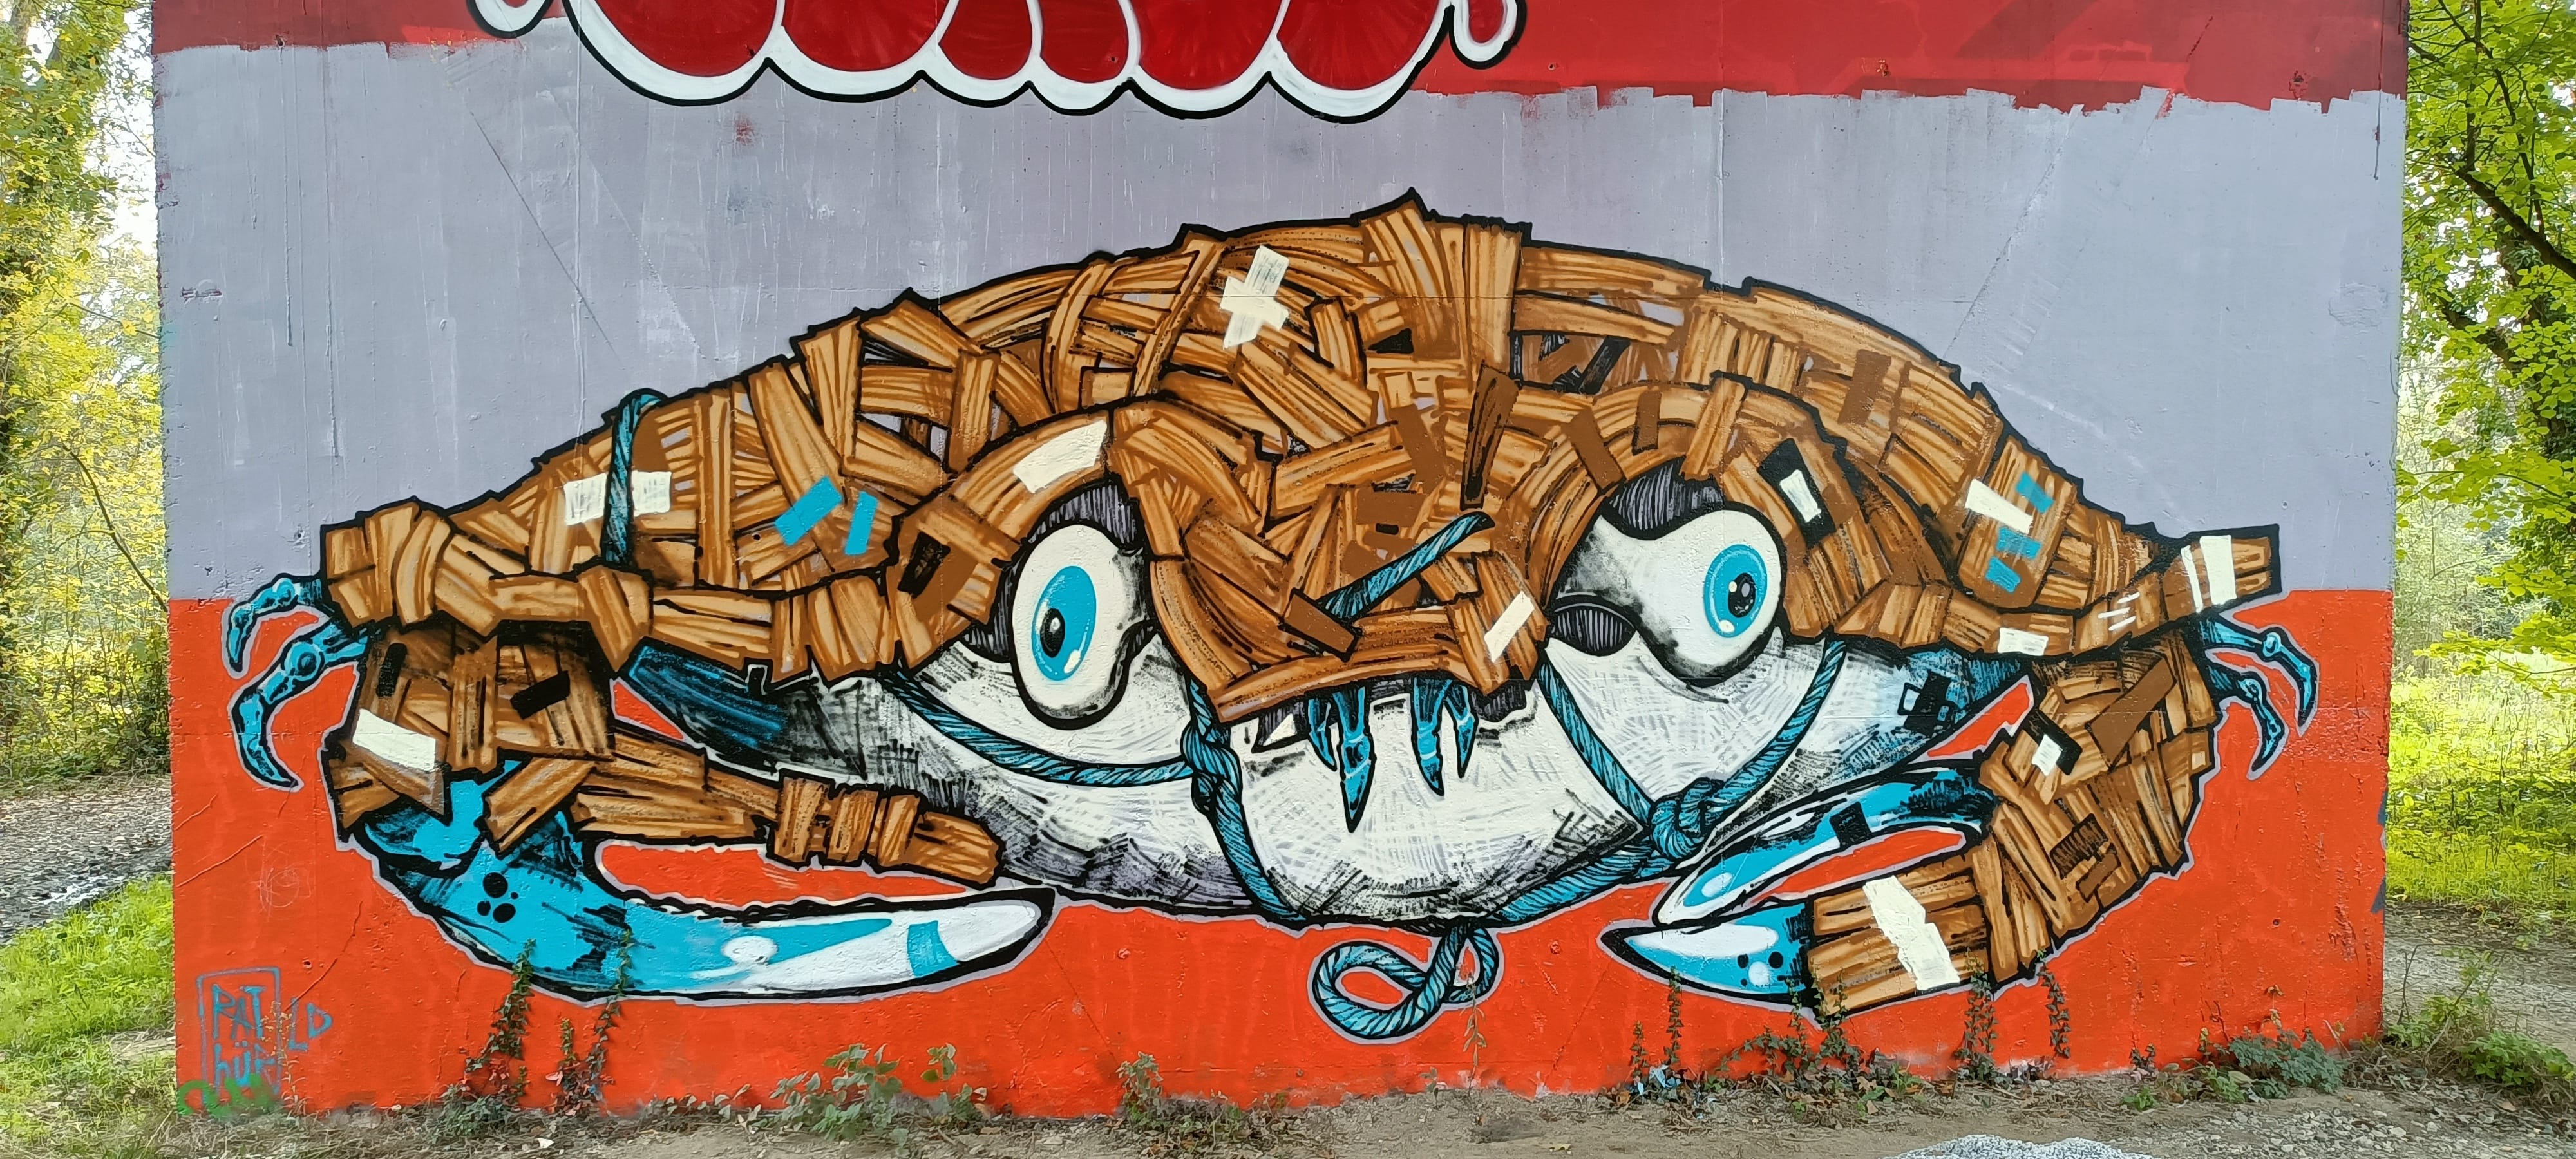 Graffiti 5484 Crabe by the artist Rathur Ld captured by Rabot in Nantes France